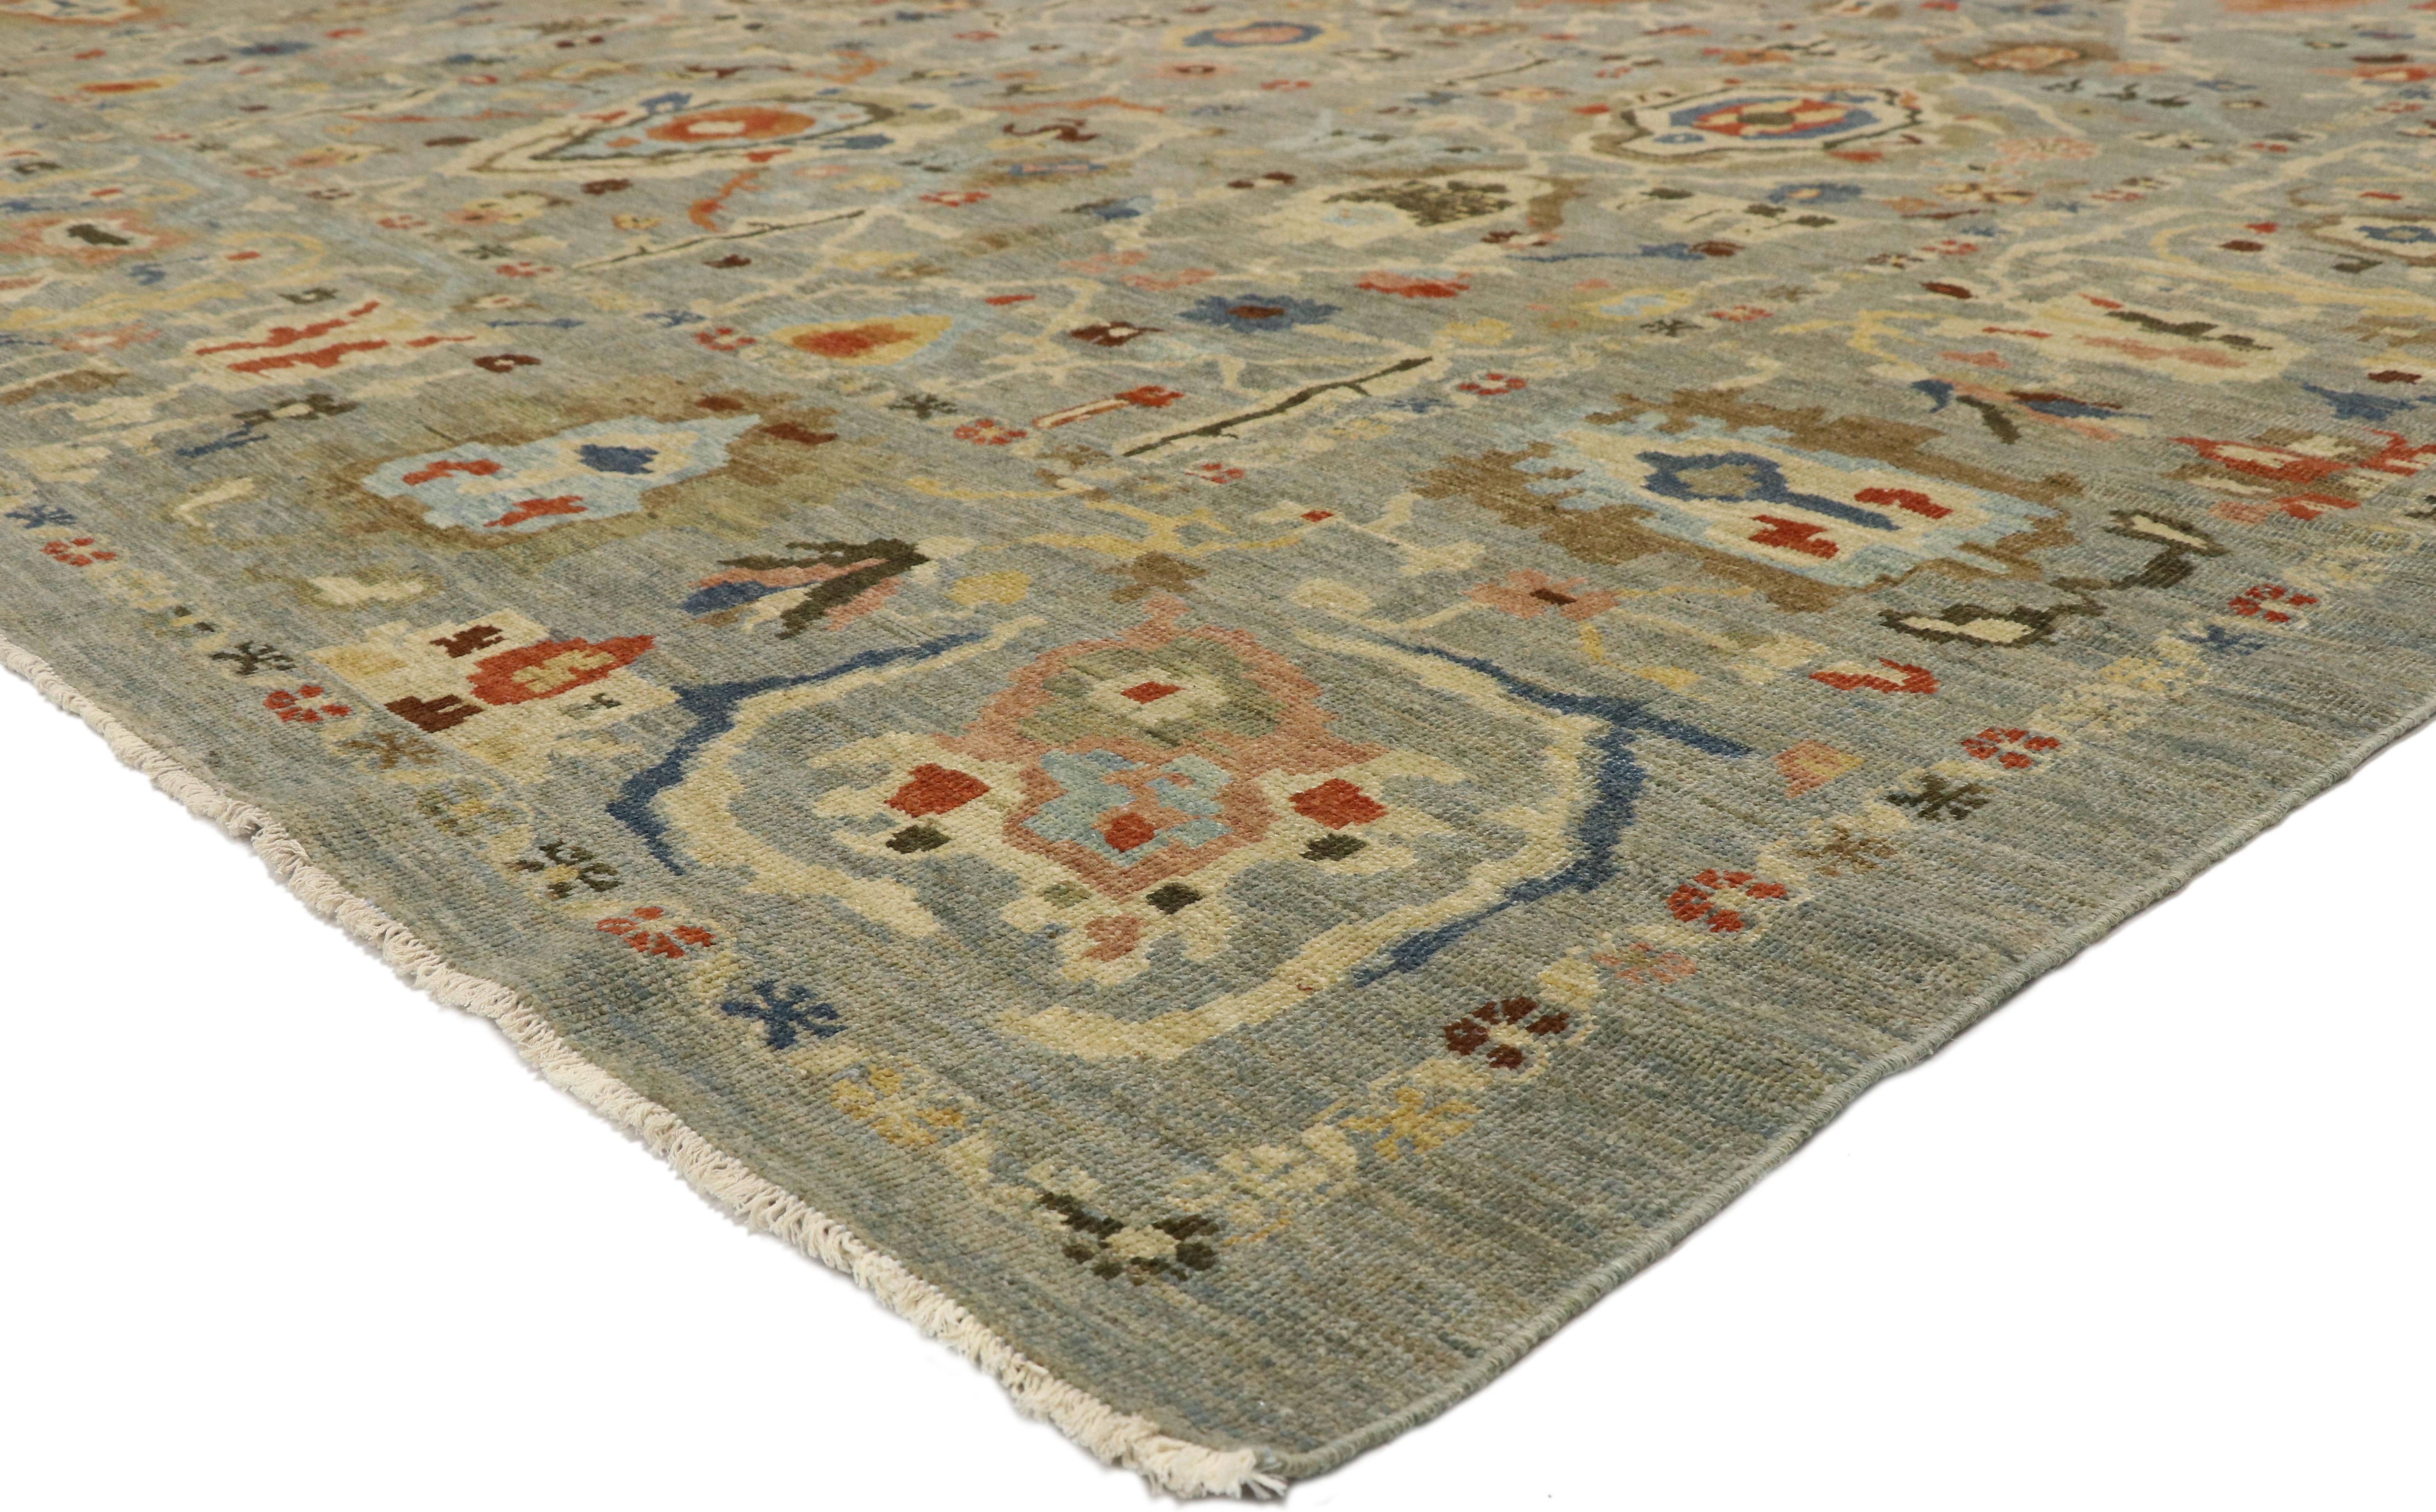 76835 Modern Blue Persian Sultanabad Rug, 12'01 x 15'02. Infused with the principles of Organic Modern style and Biophilic Design, this hand-knotted wool contemporary Persian Sultanabad rug showcases stylish complexity and a highly decorative